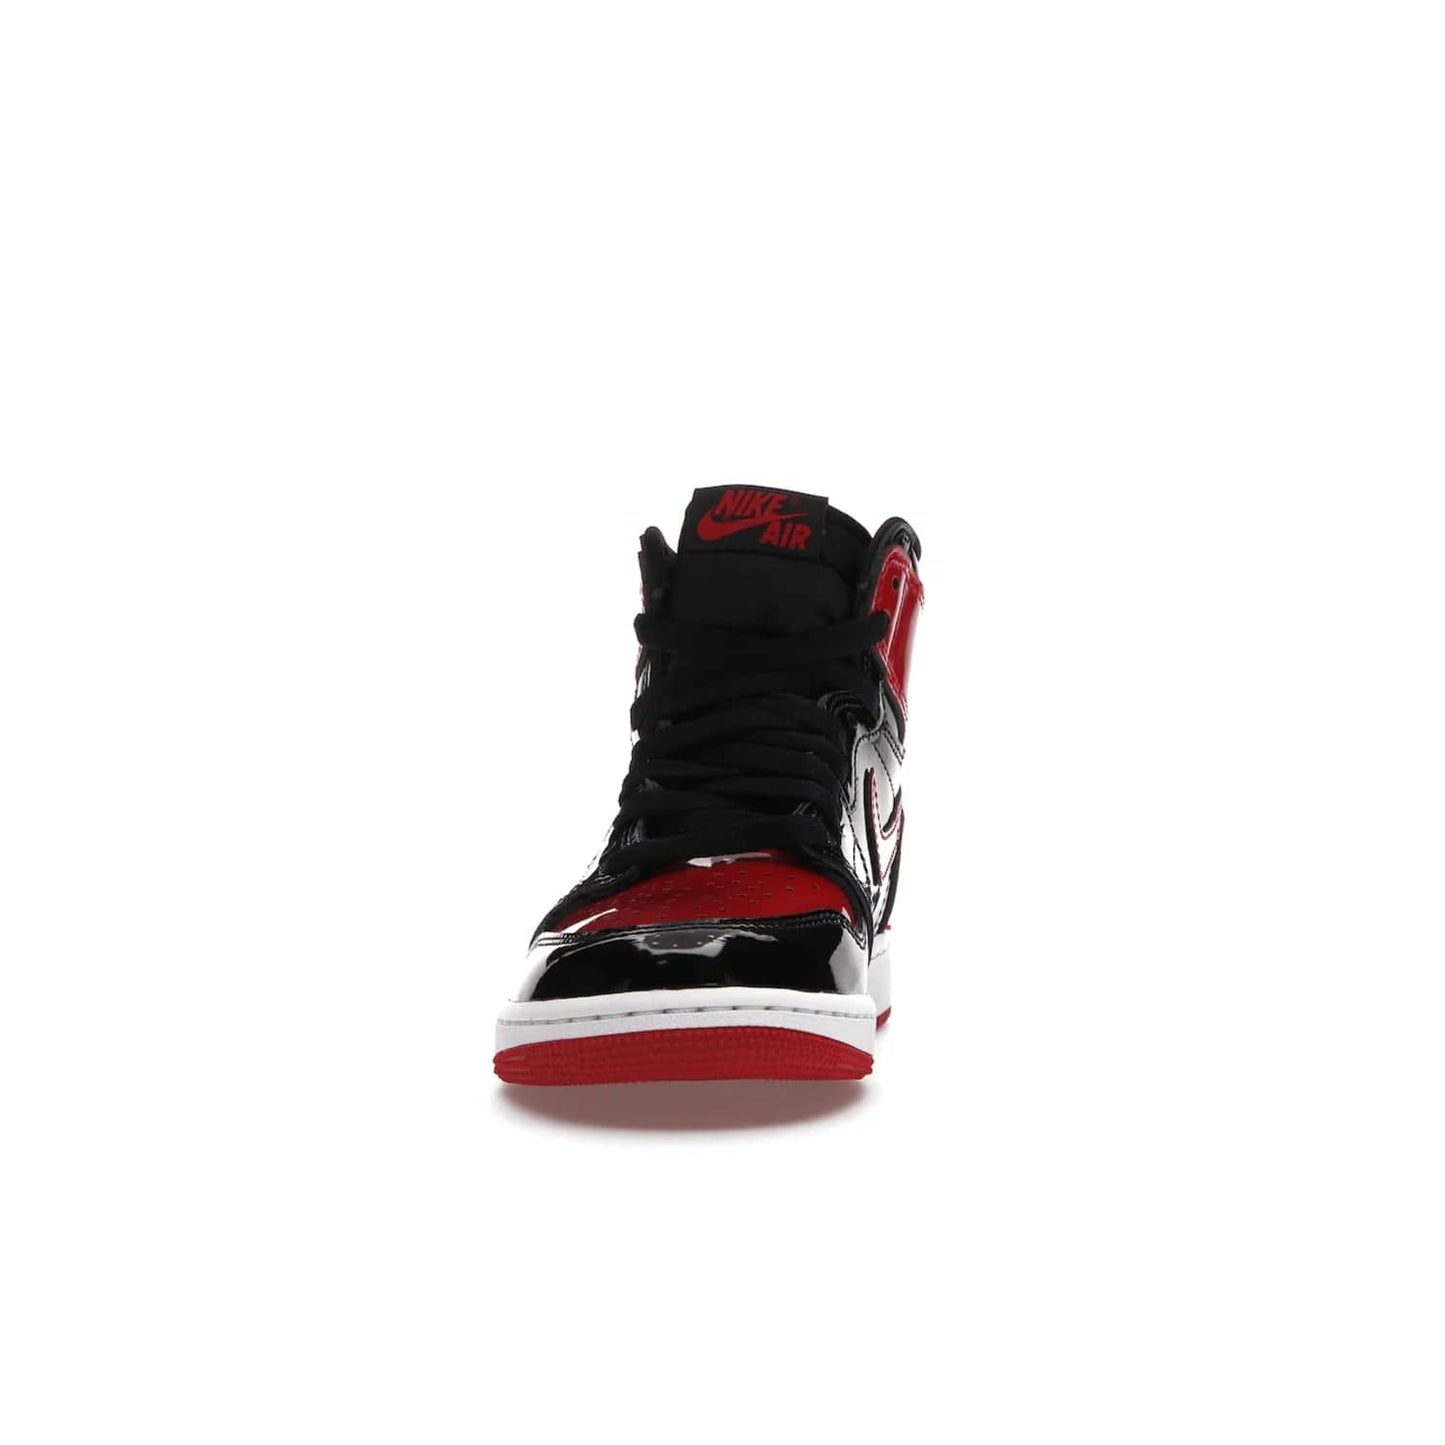 Jordan 1 Retro High OG Patent Bred (GS) - Image 11 - Only at www.BallersClubKickz.com - Upgrade your sneaker game with the iconic Air Jordan 1 Retro High OG Bred Patent GS. Crafted with premium patent leather and basketball-inspired details for a classic look, they also feature an encapsulated Air-sole cushioning and enhanced red rubber outsole. Don't miss this timeless sneaker with a striking black, white, and varsity red colorway, dropping December 2021.